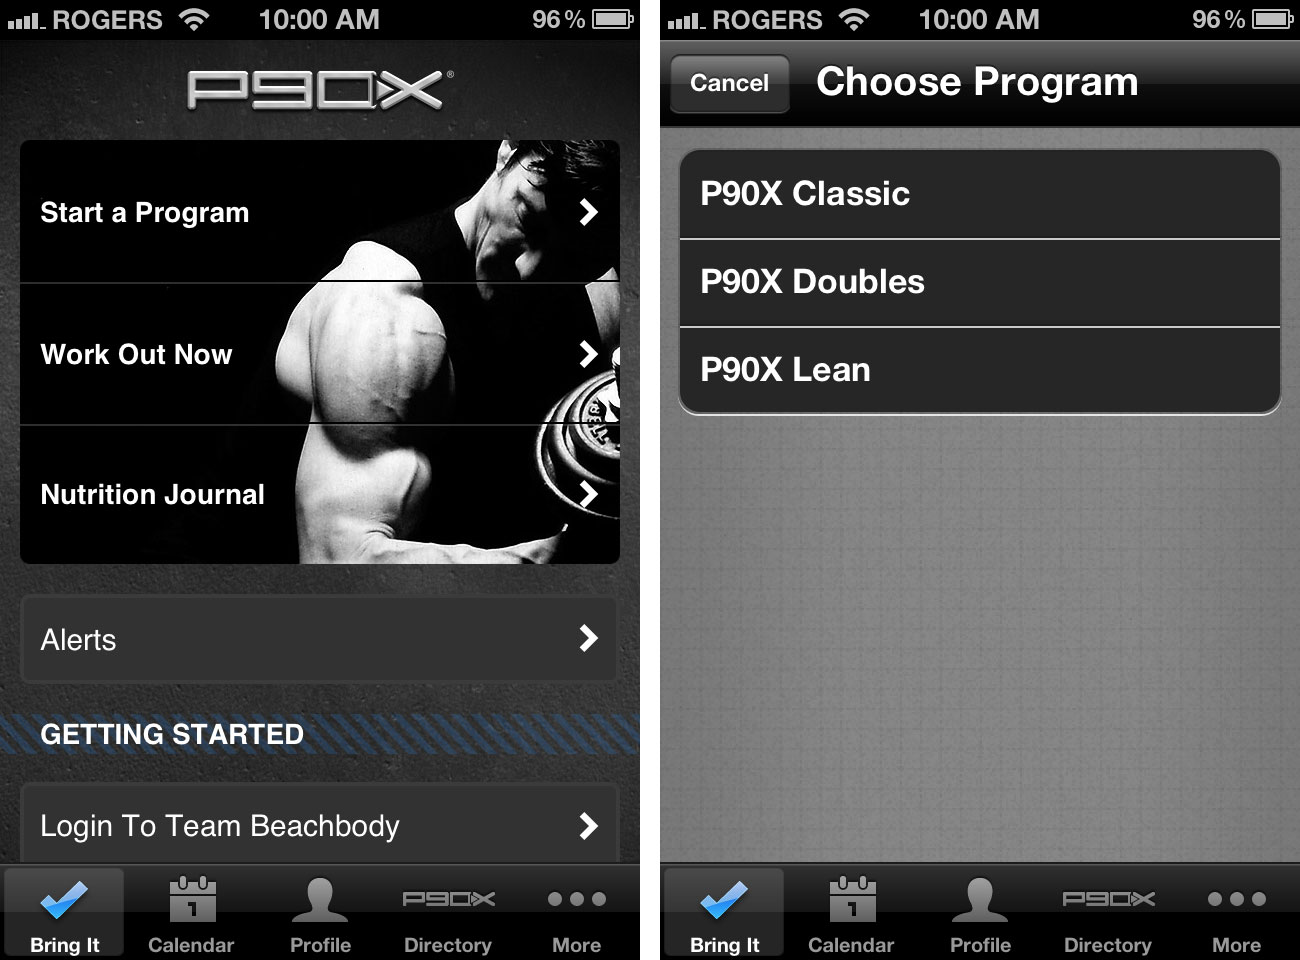 You can choose individual workouts in P90X for iPhone, but the real benefit comes from starting a 90-day guided program.